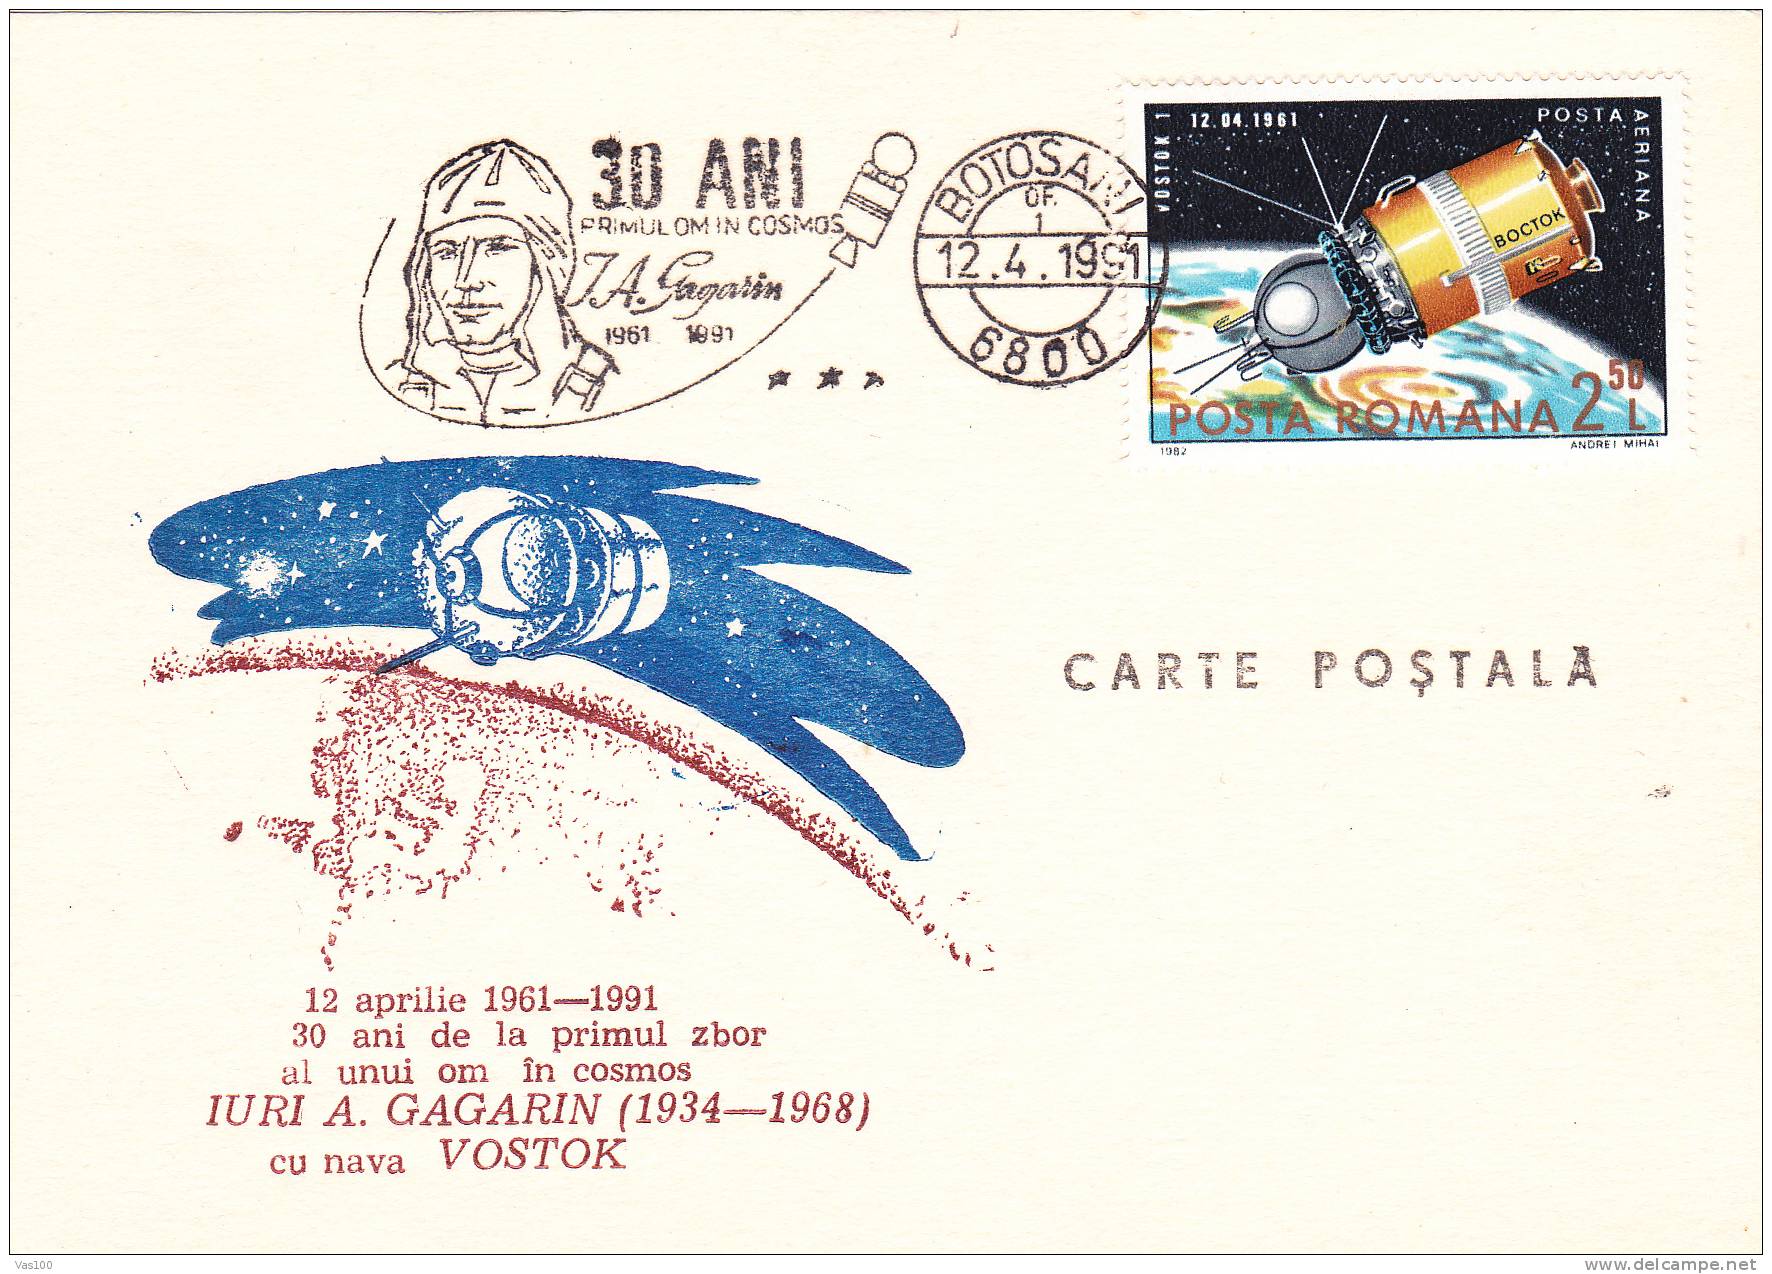 Space Mission,IURI GAGARIN First The Man In Space,1991 Post Card Obliteration BOTOSANI - Romania. - Europe